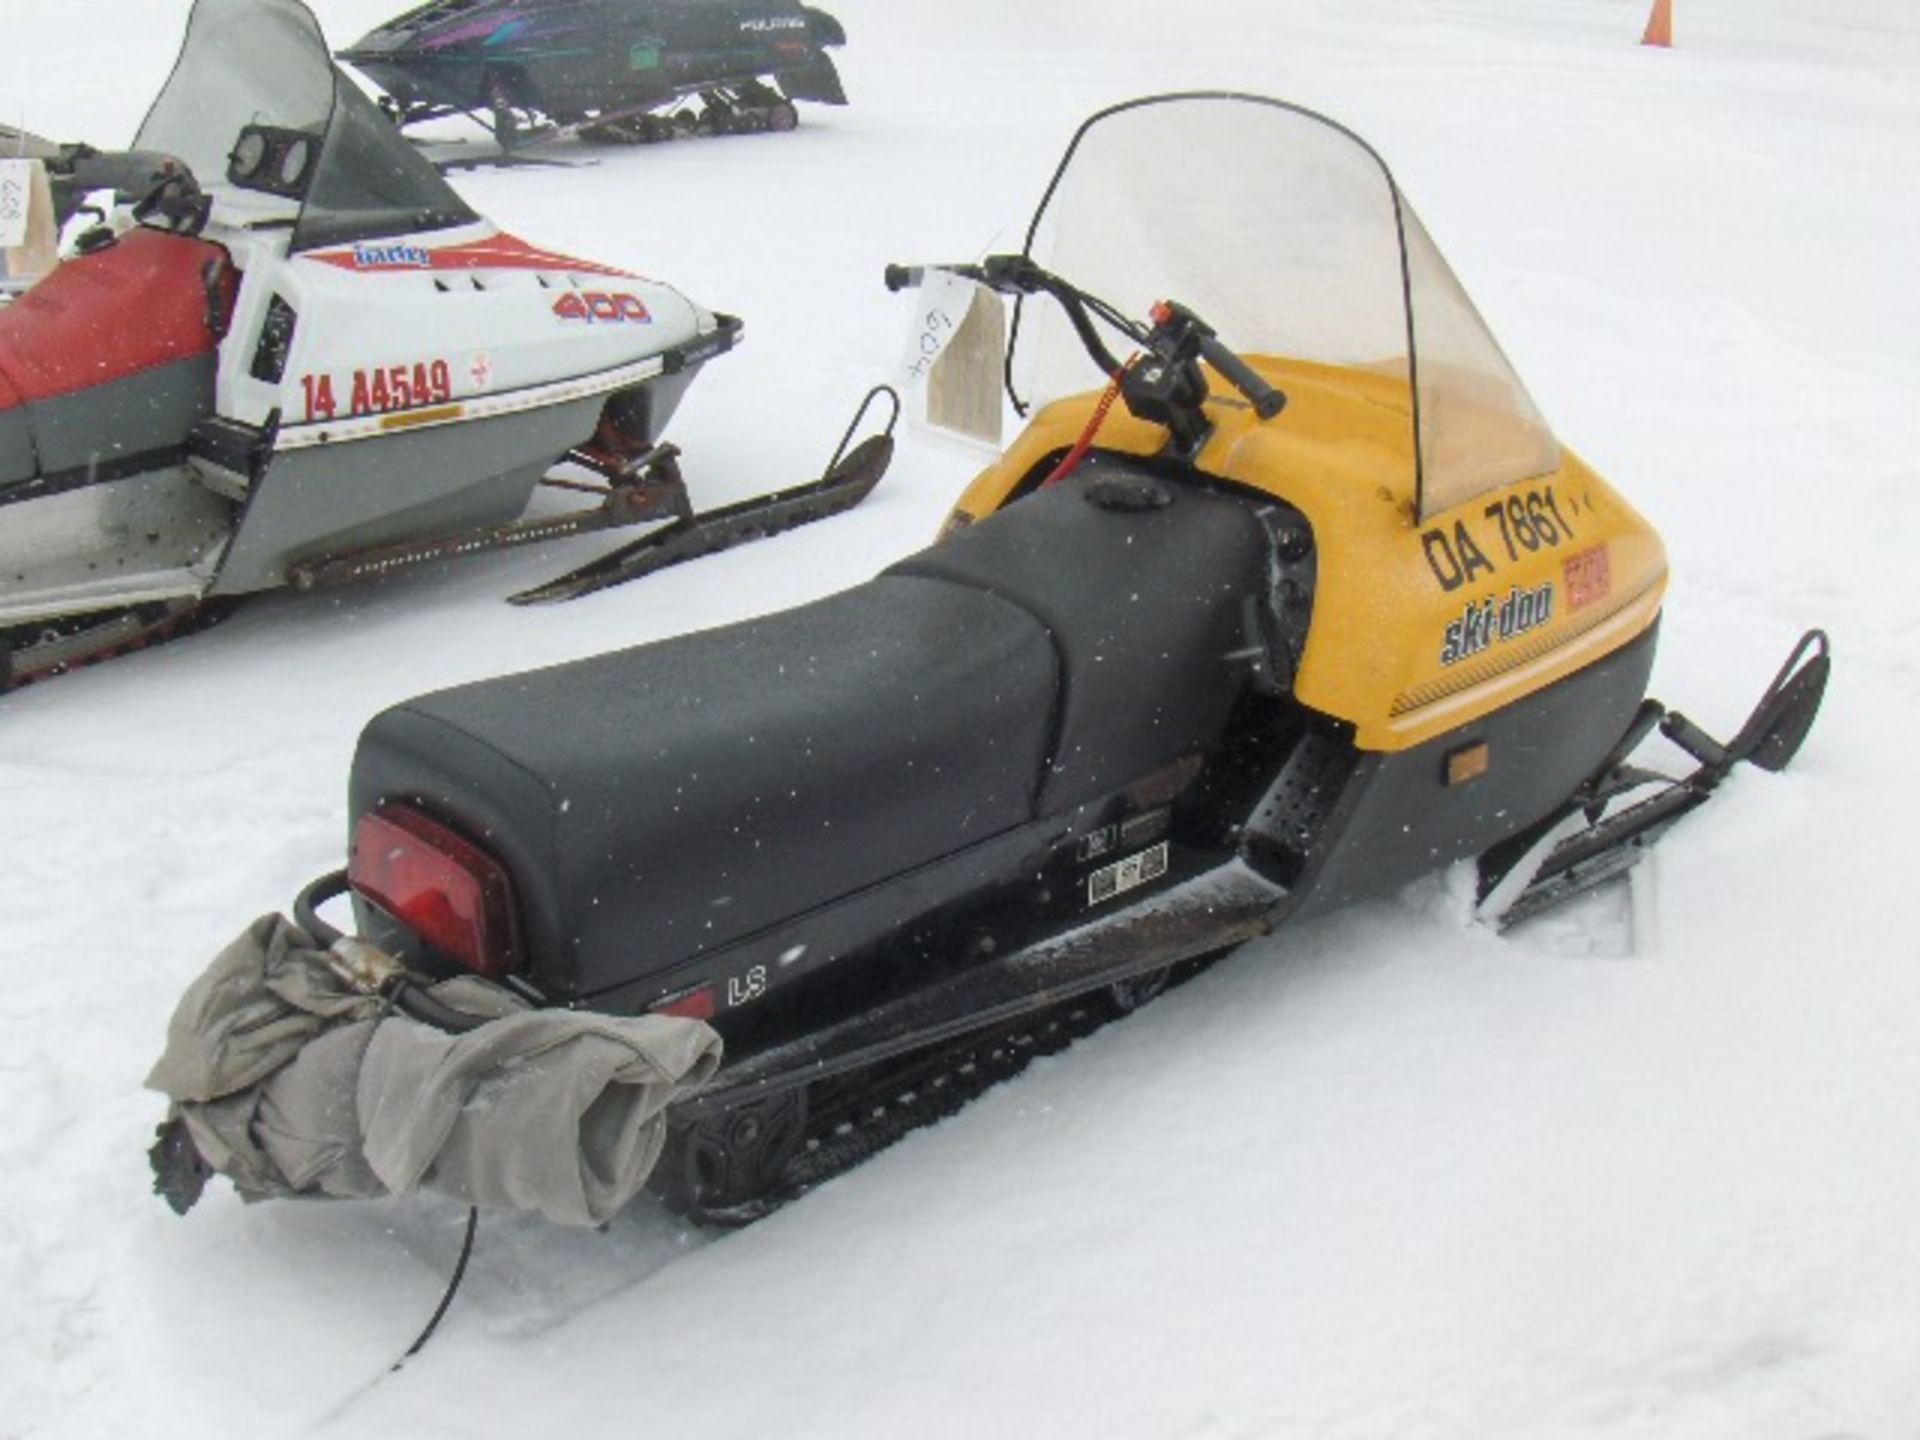 1987 SKI DOO 250 CITATION  321700320 snowmobile, owner started at time of auction check in, - Image 3 of 4